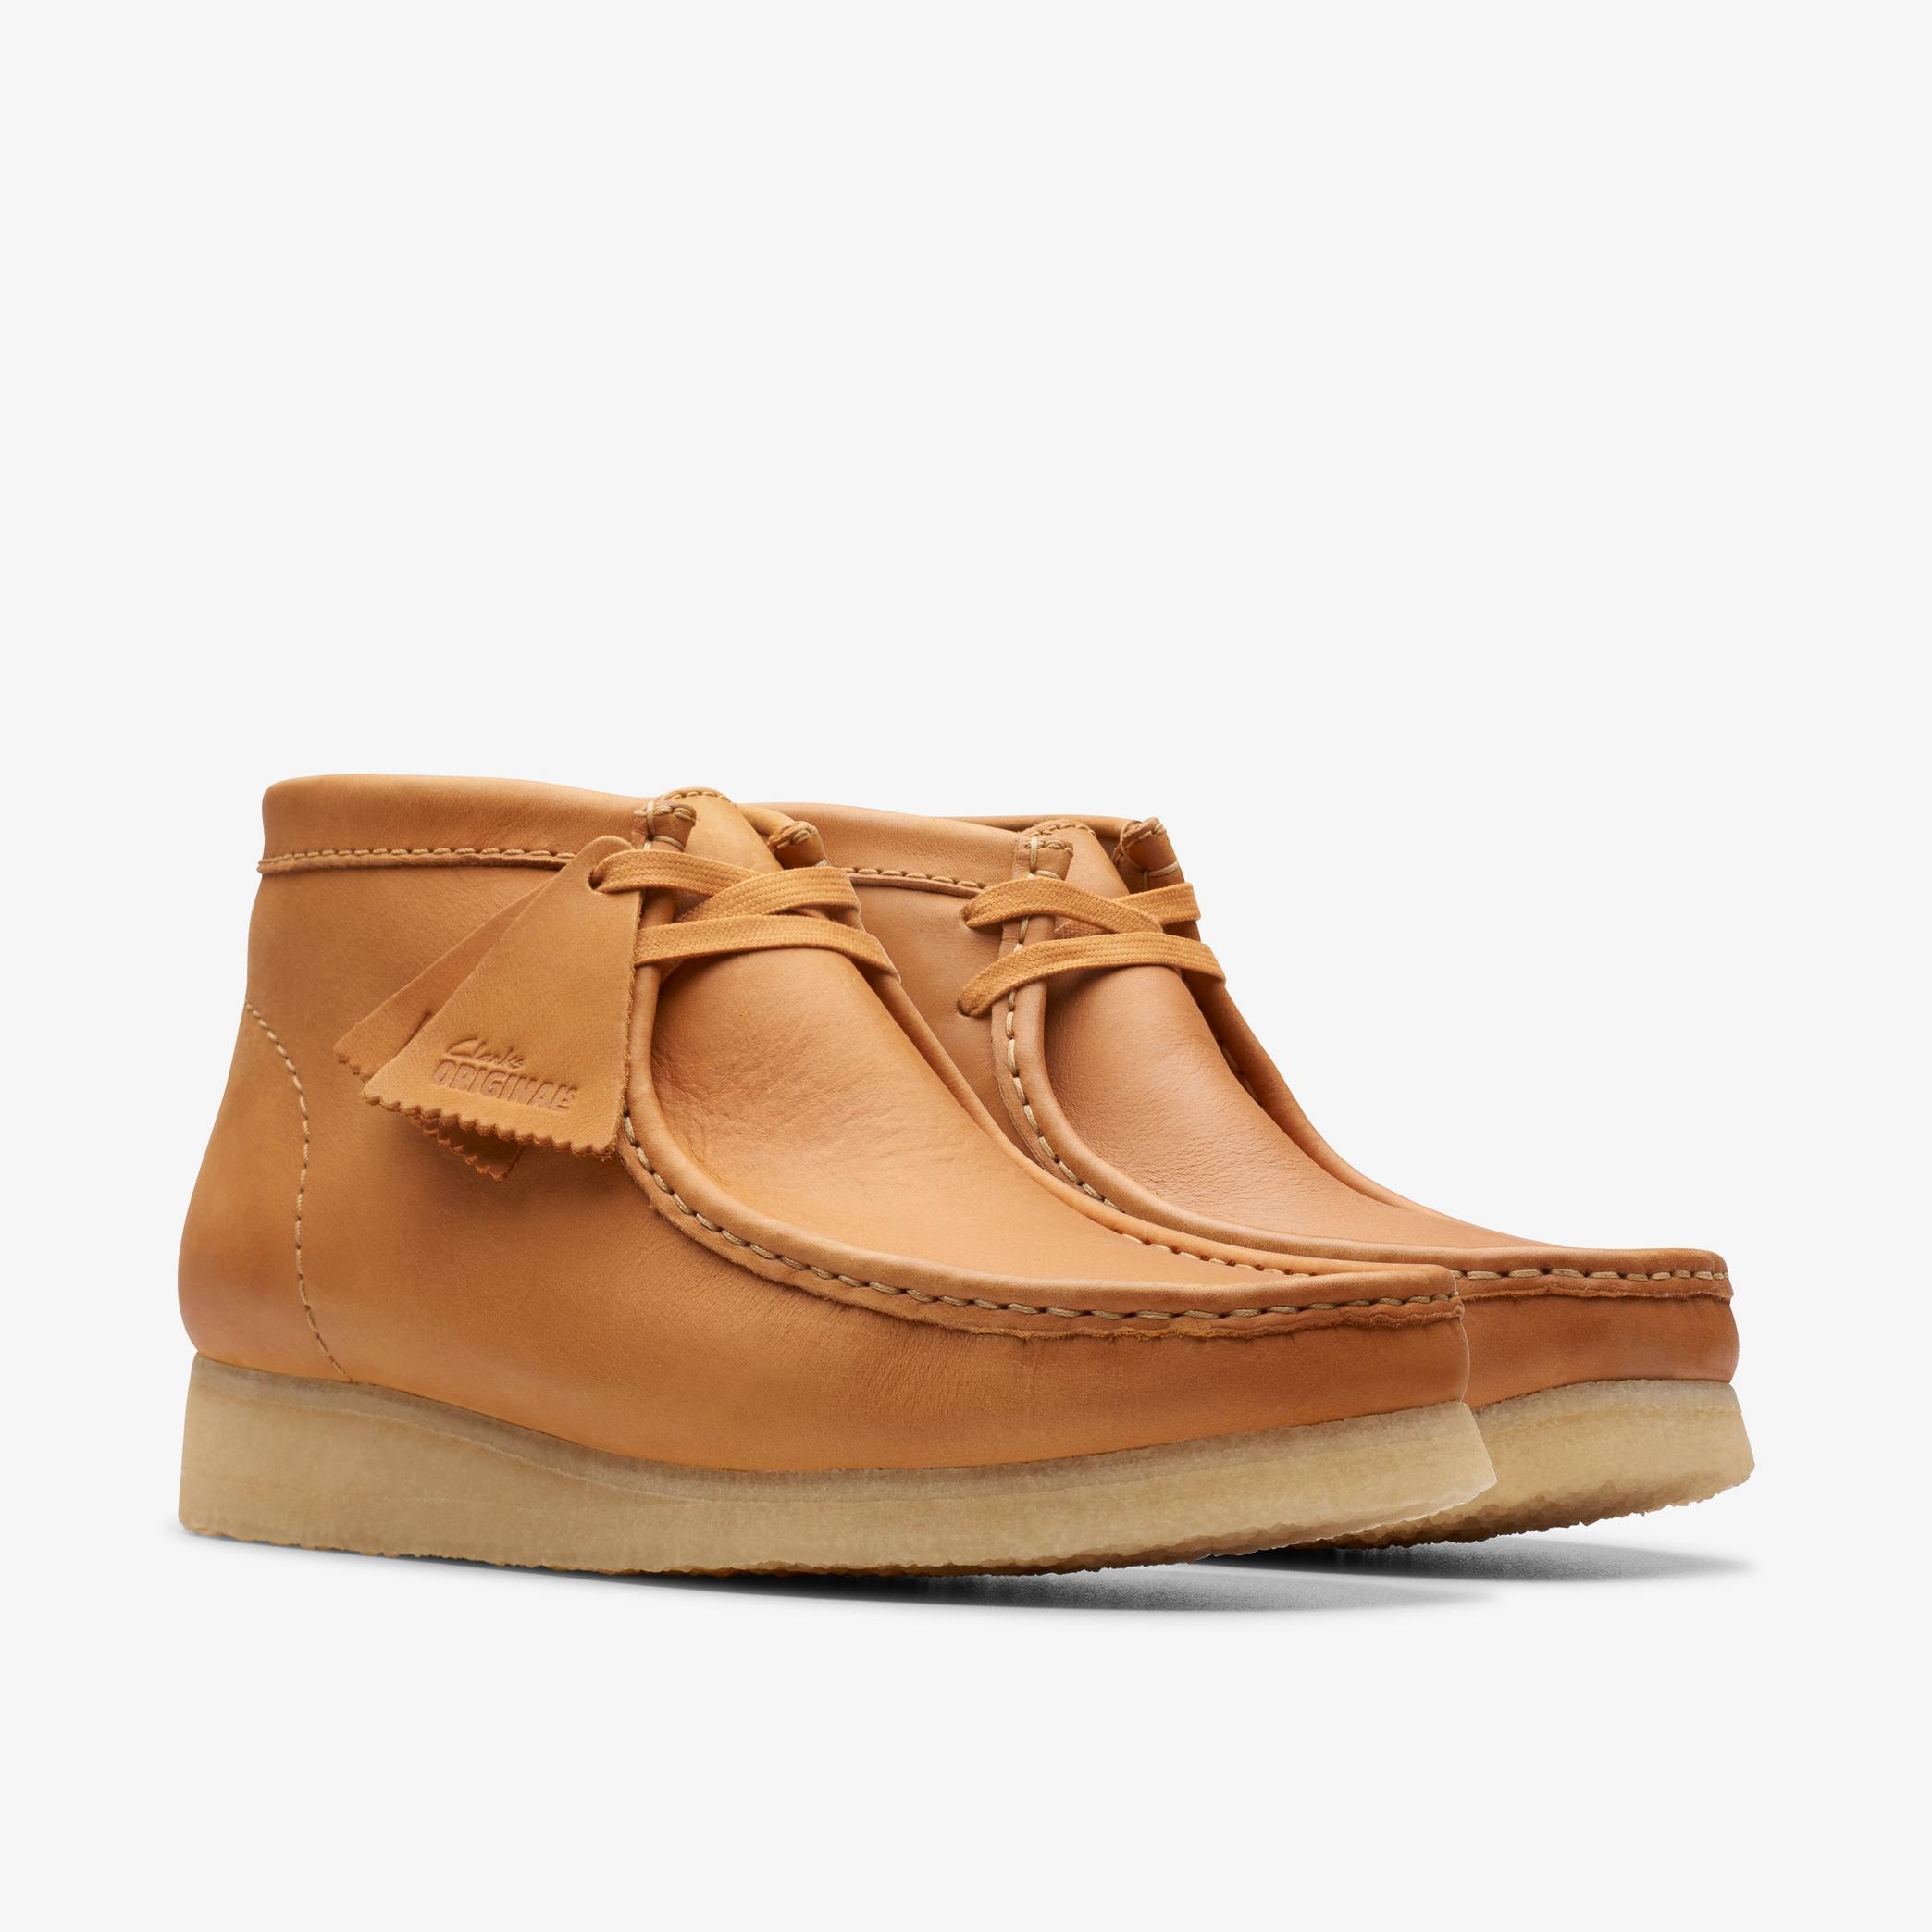 Wallabee Boot Mid Tan Leather Wallabee, view 4 of 6